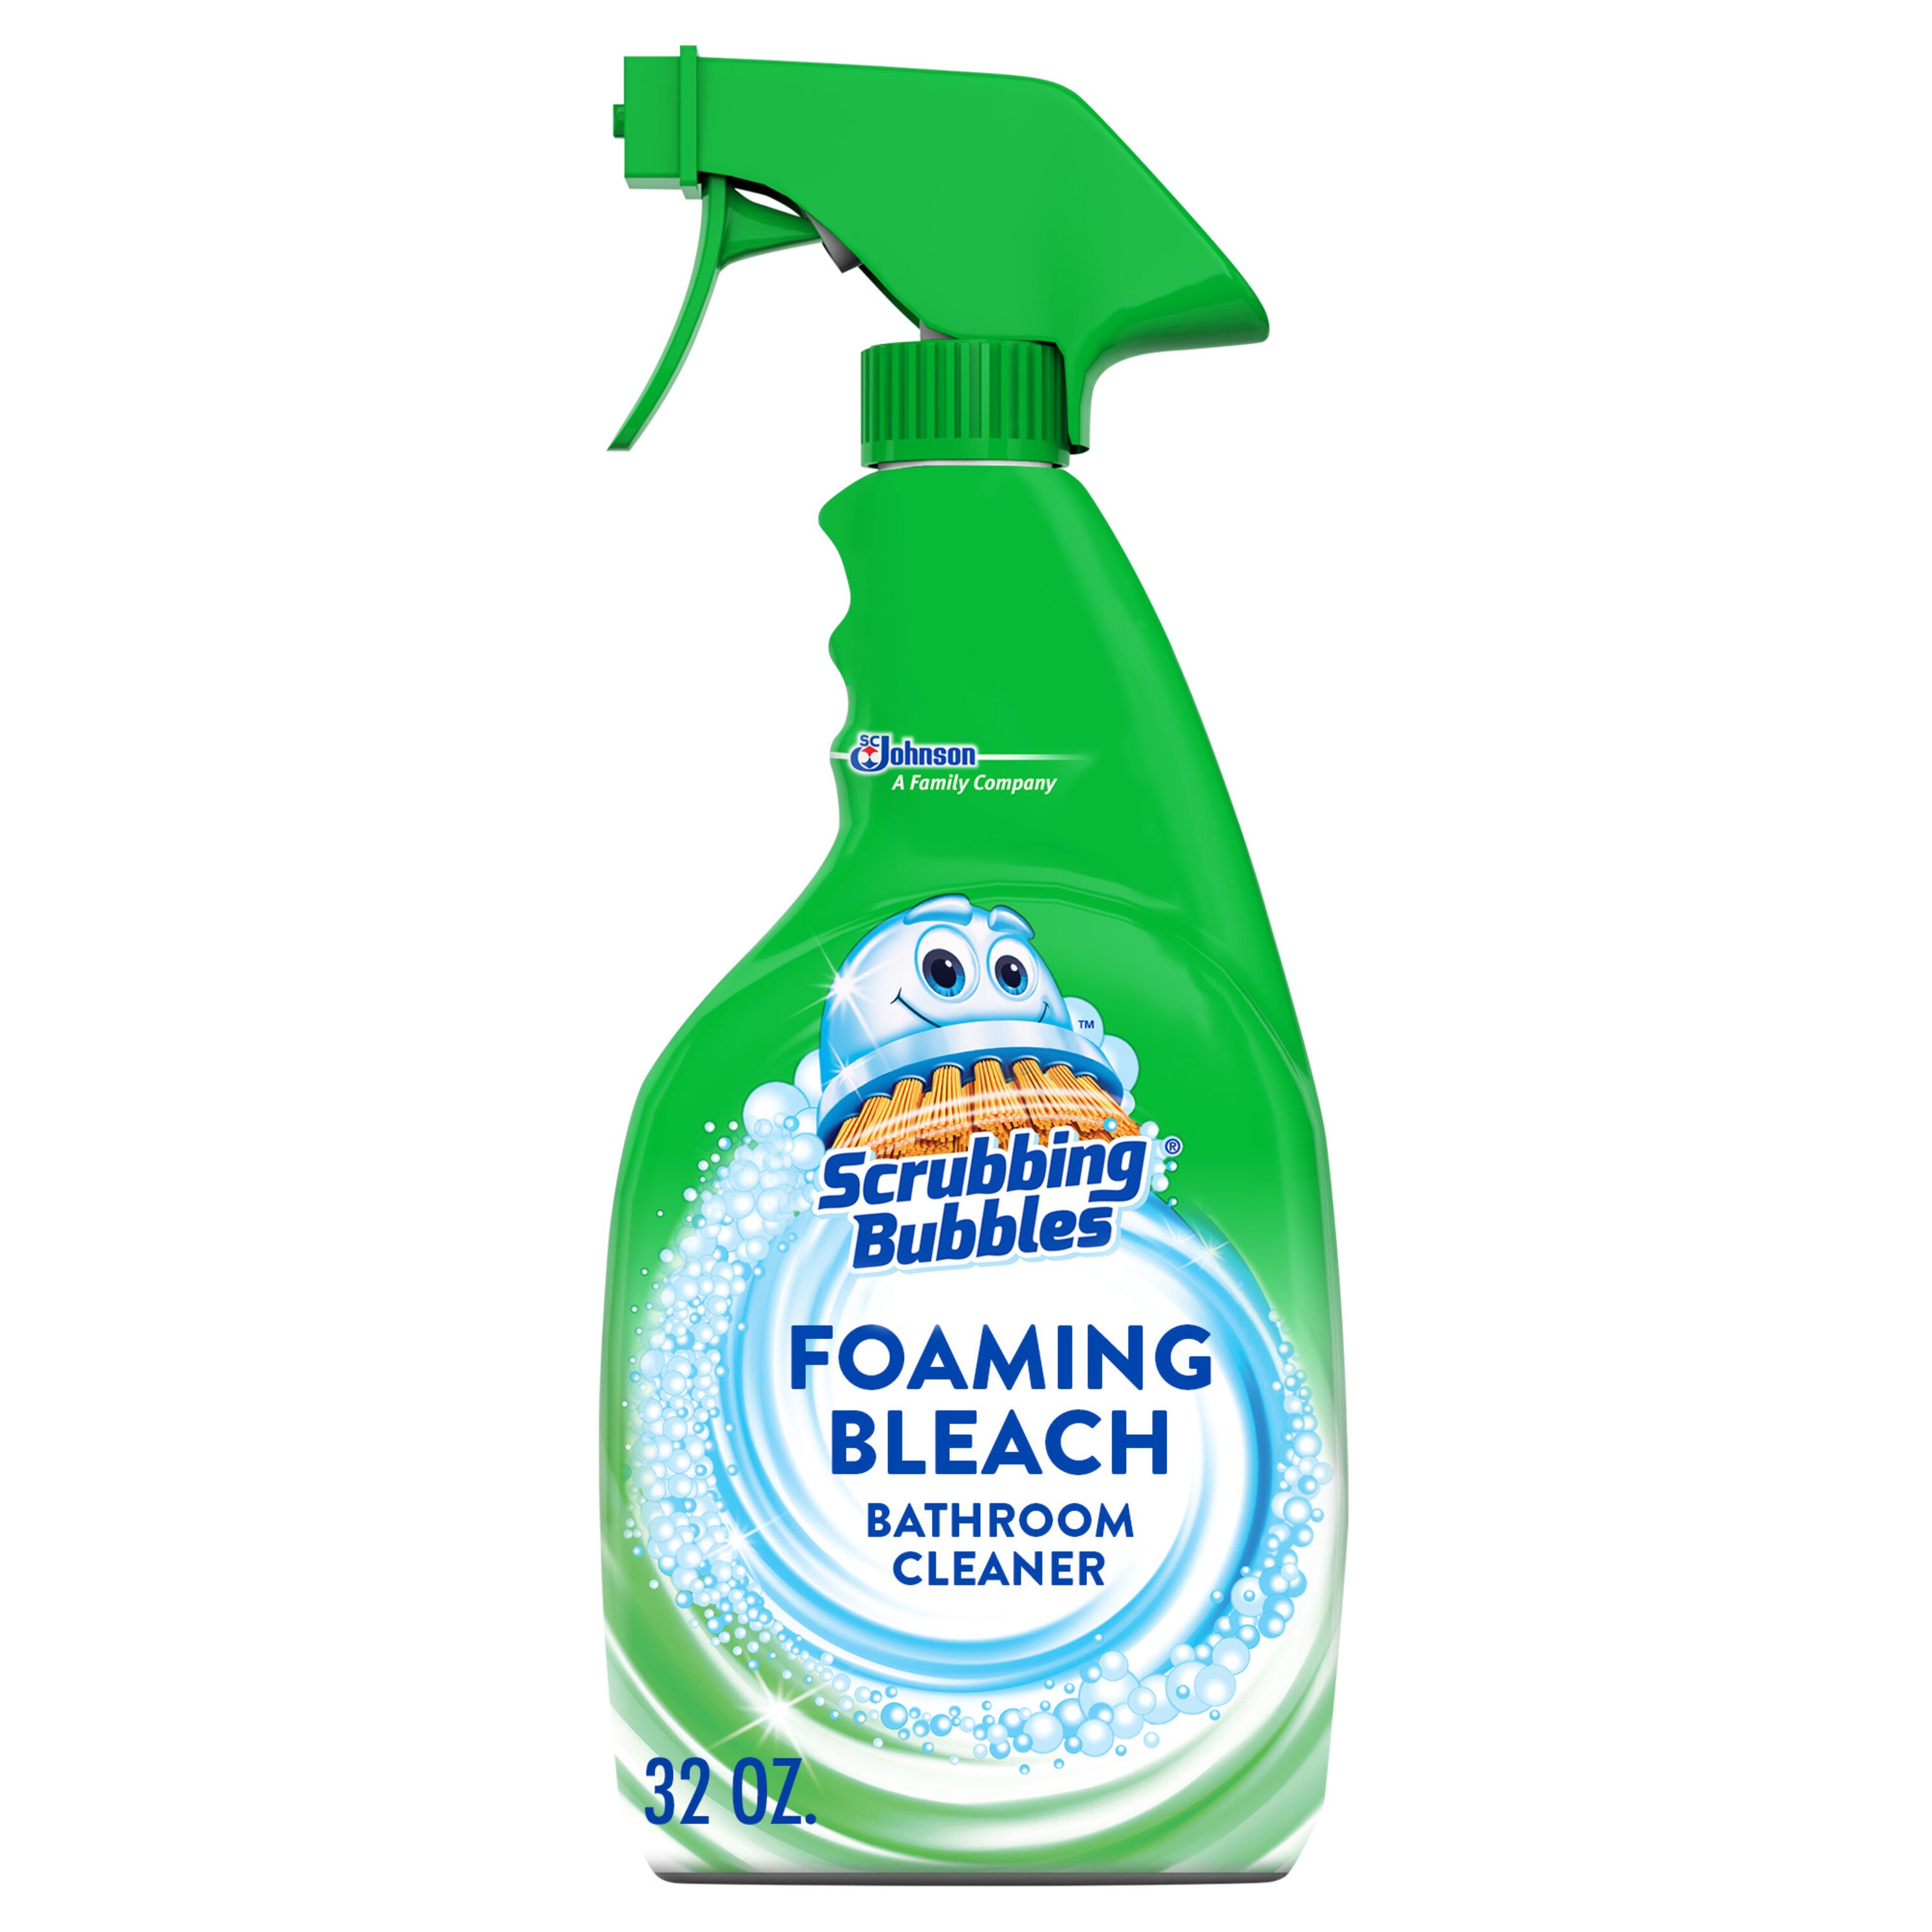 LA's Totally Awesome Foaming Bathroom Cleaner With Bleach 32 fl oz 2pack